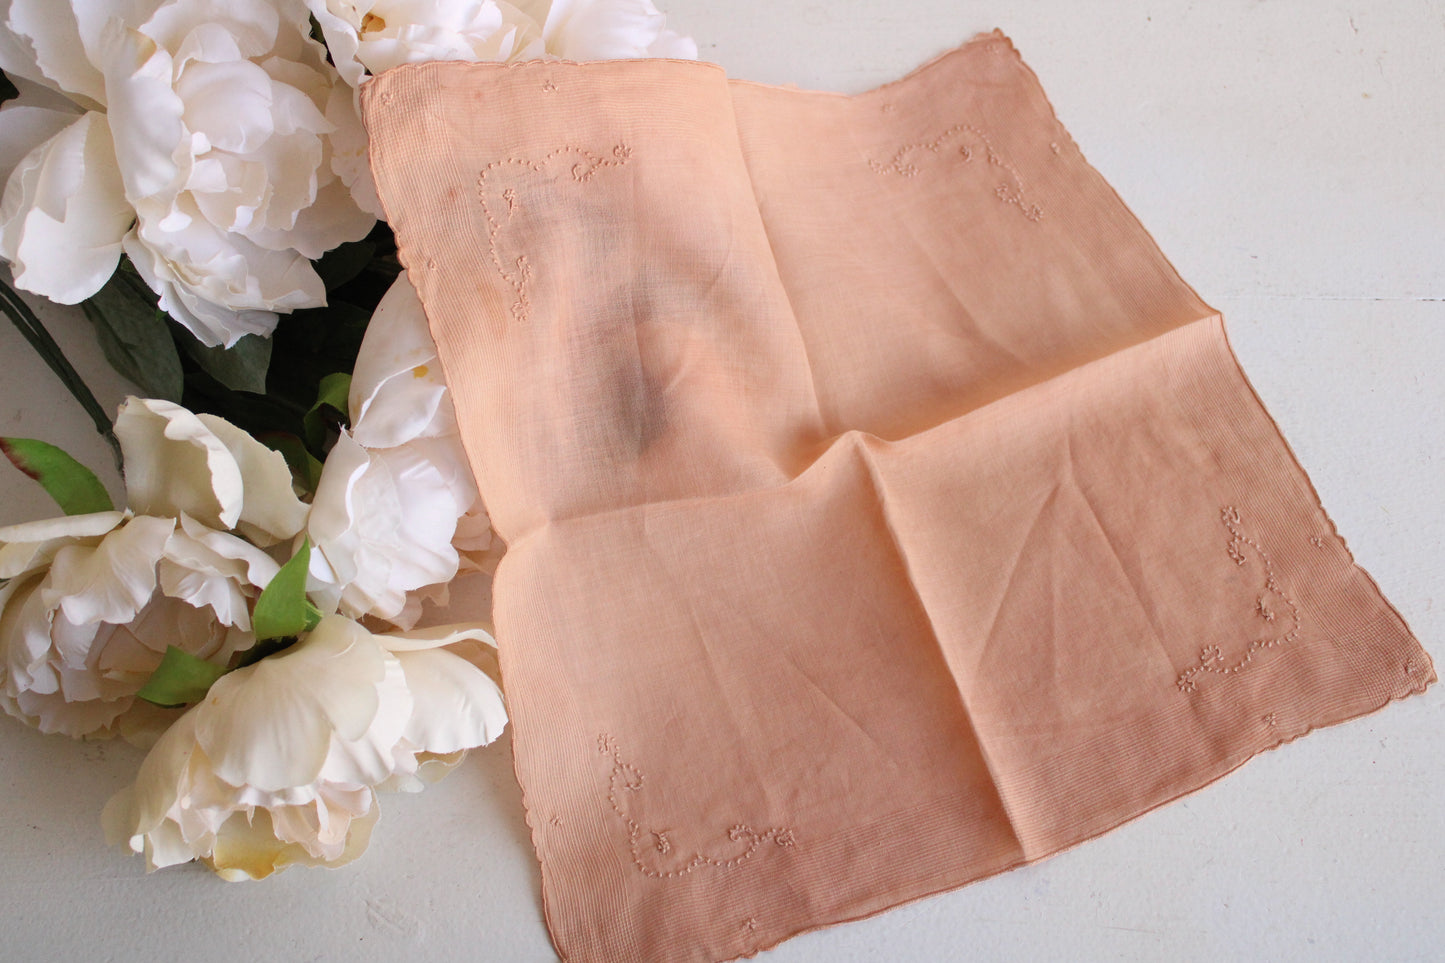 Hand Plant Dyed Vintage Handkerchief in Salmon Pink